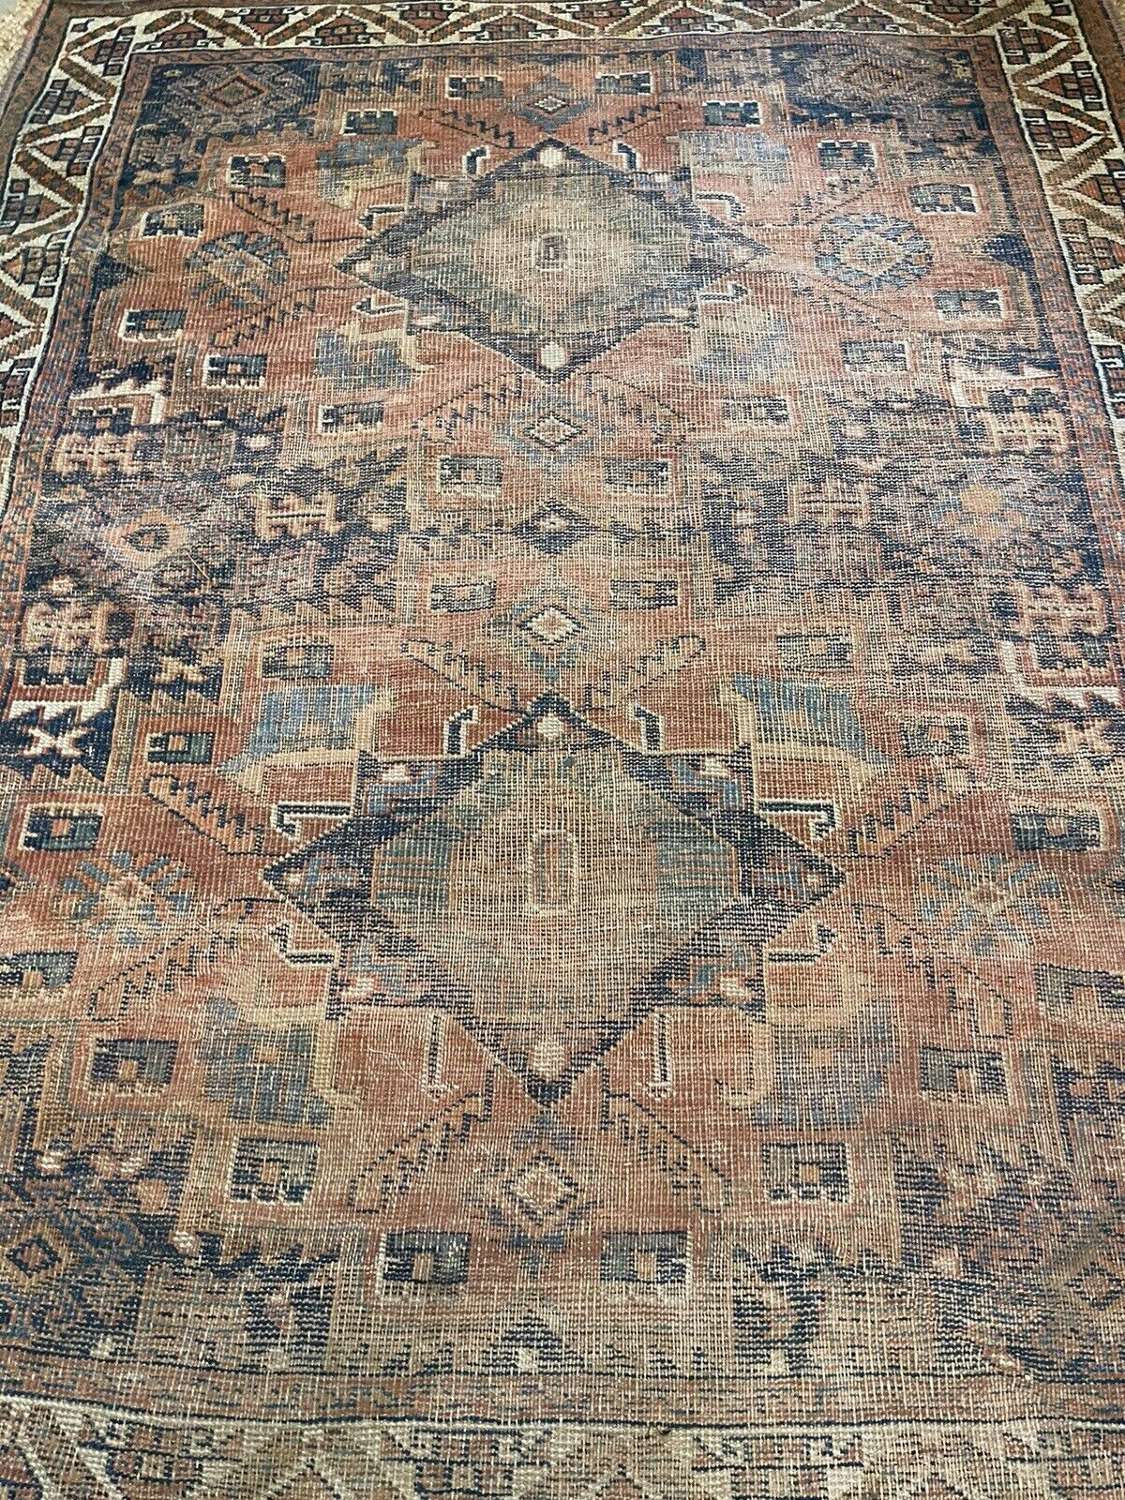 Antique Persian country house rug early 20th century